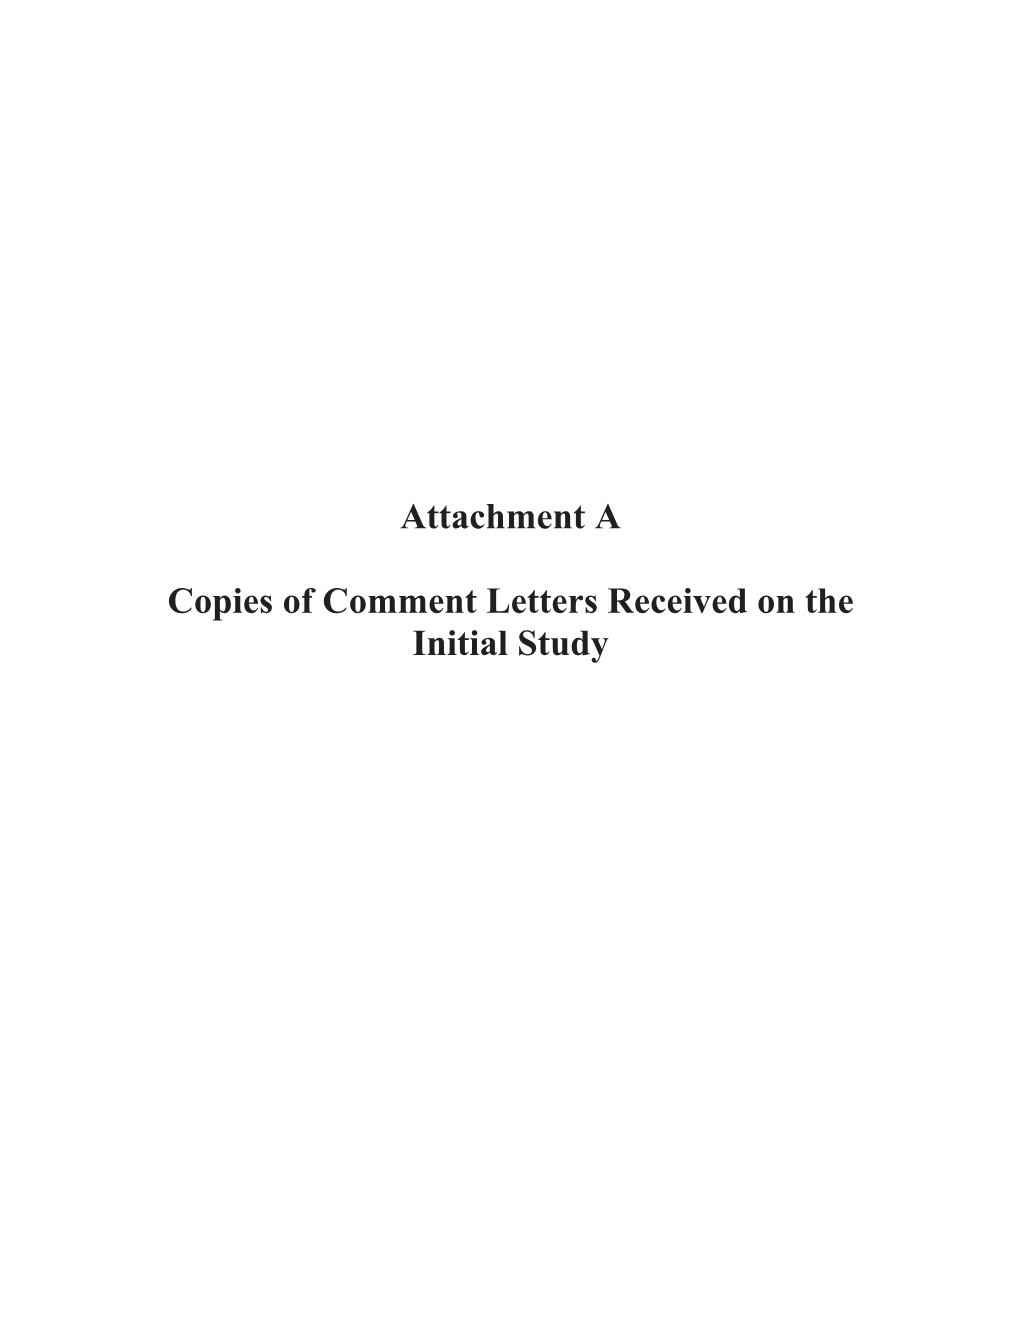 Attachment a Copies of Comment Letters Received on the Initial Study